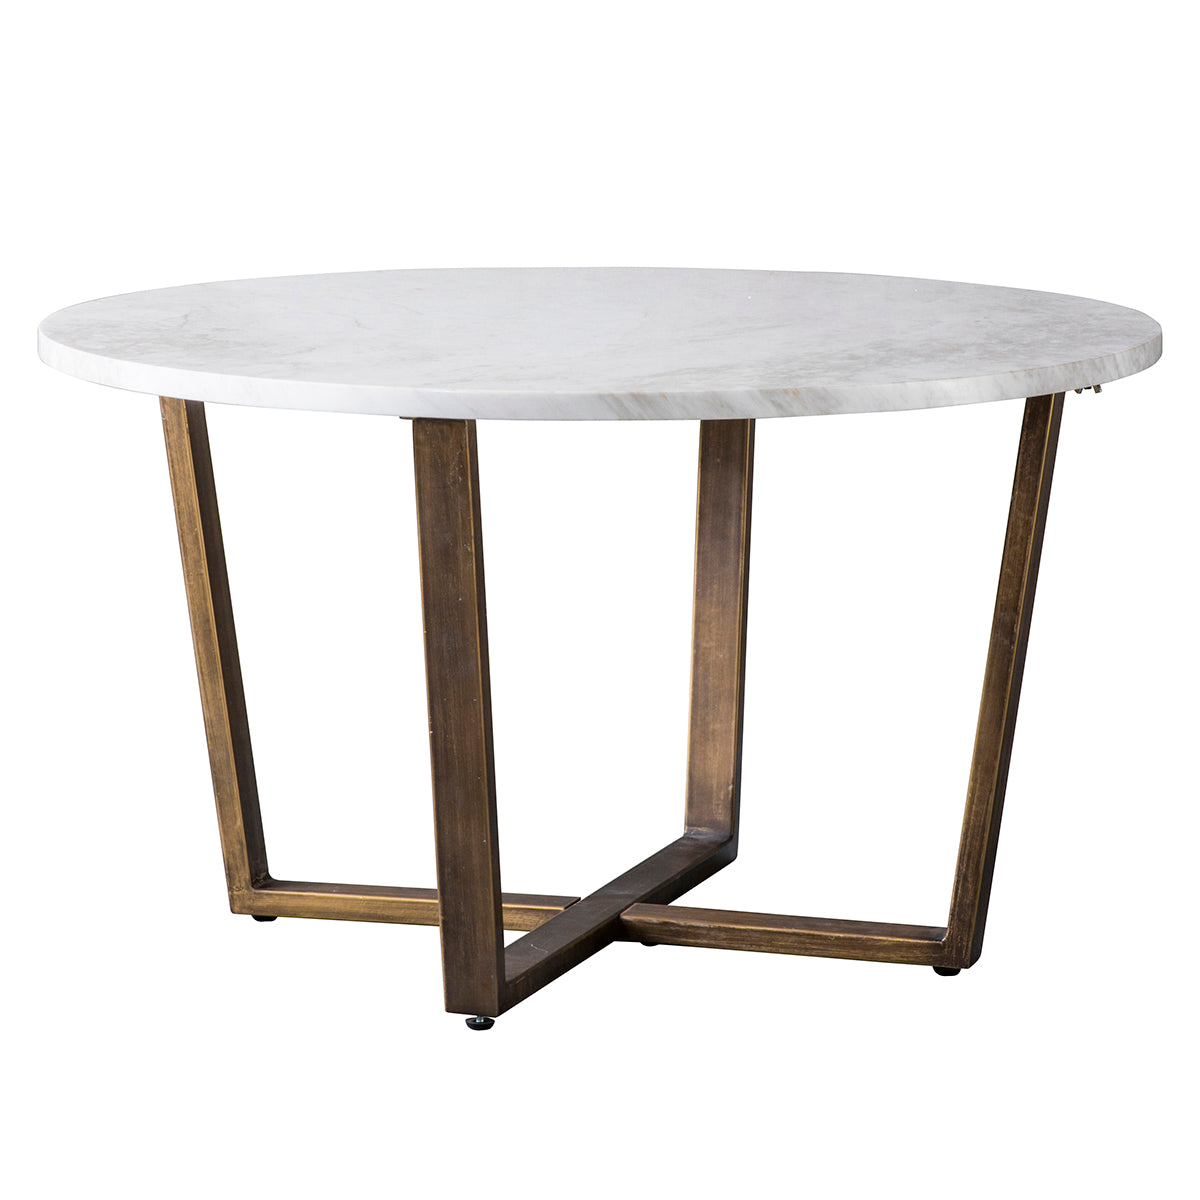 Load image into Gallery viewer, A Hallsand Round Coffee Table Marble 800x800x450mm with brass legs for interior decor.
